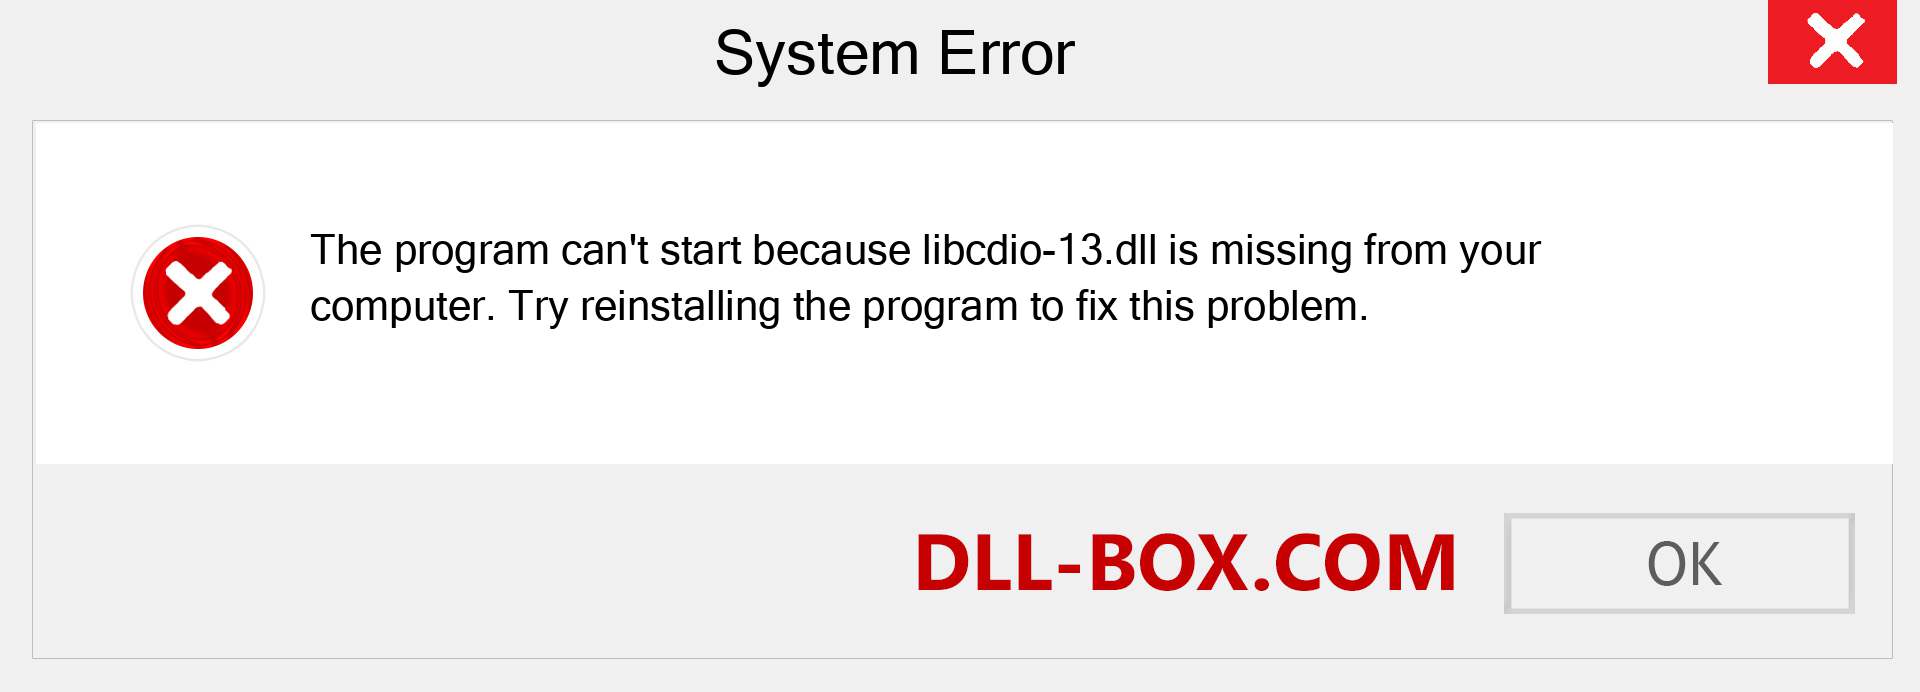  libcdio-13.dll file is missing?. Download for Windows 7, 8, 10 - Fix  libcdio-13 dll Missing Error on Windows, photos, images